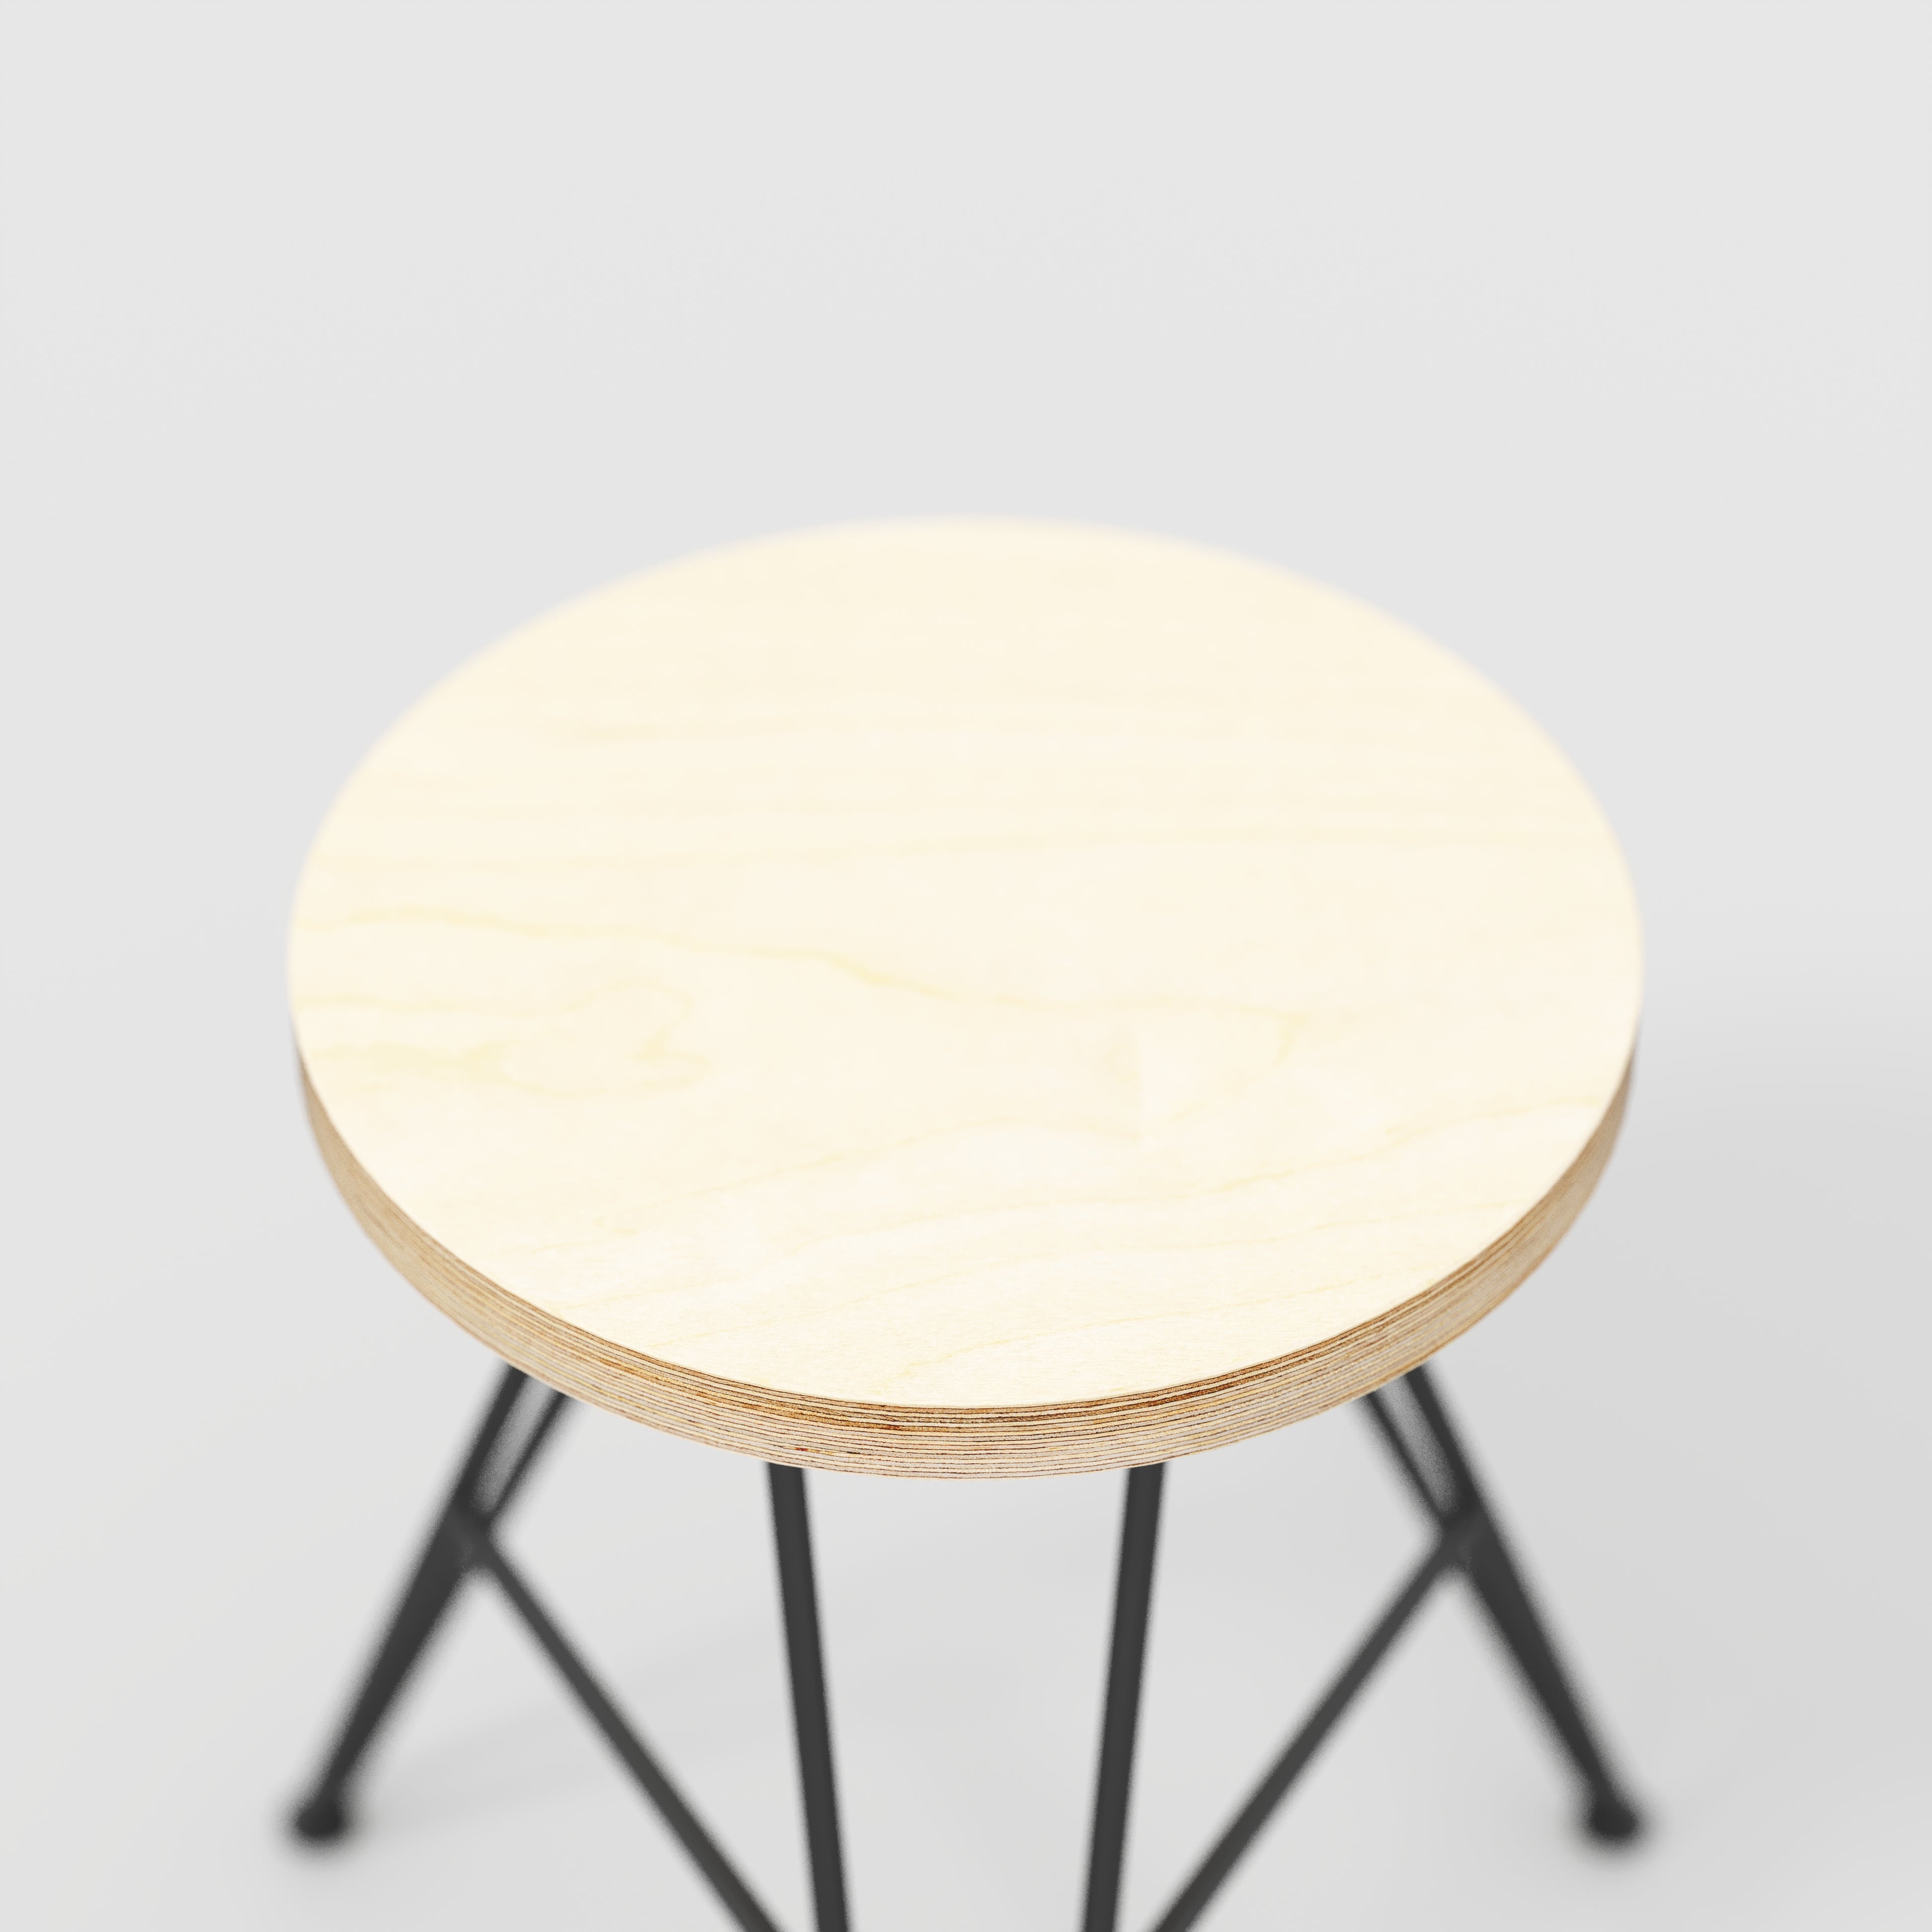 Stool with Black Hairpin Base - Plywood Birch